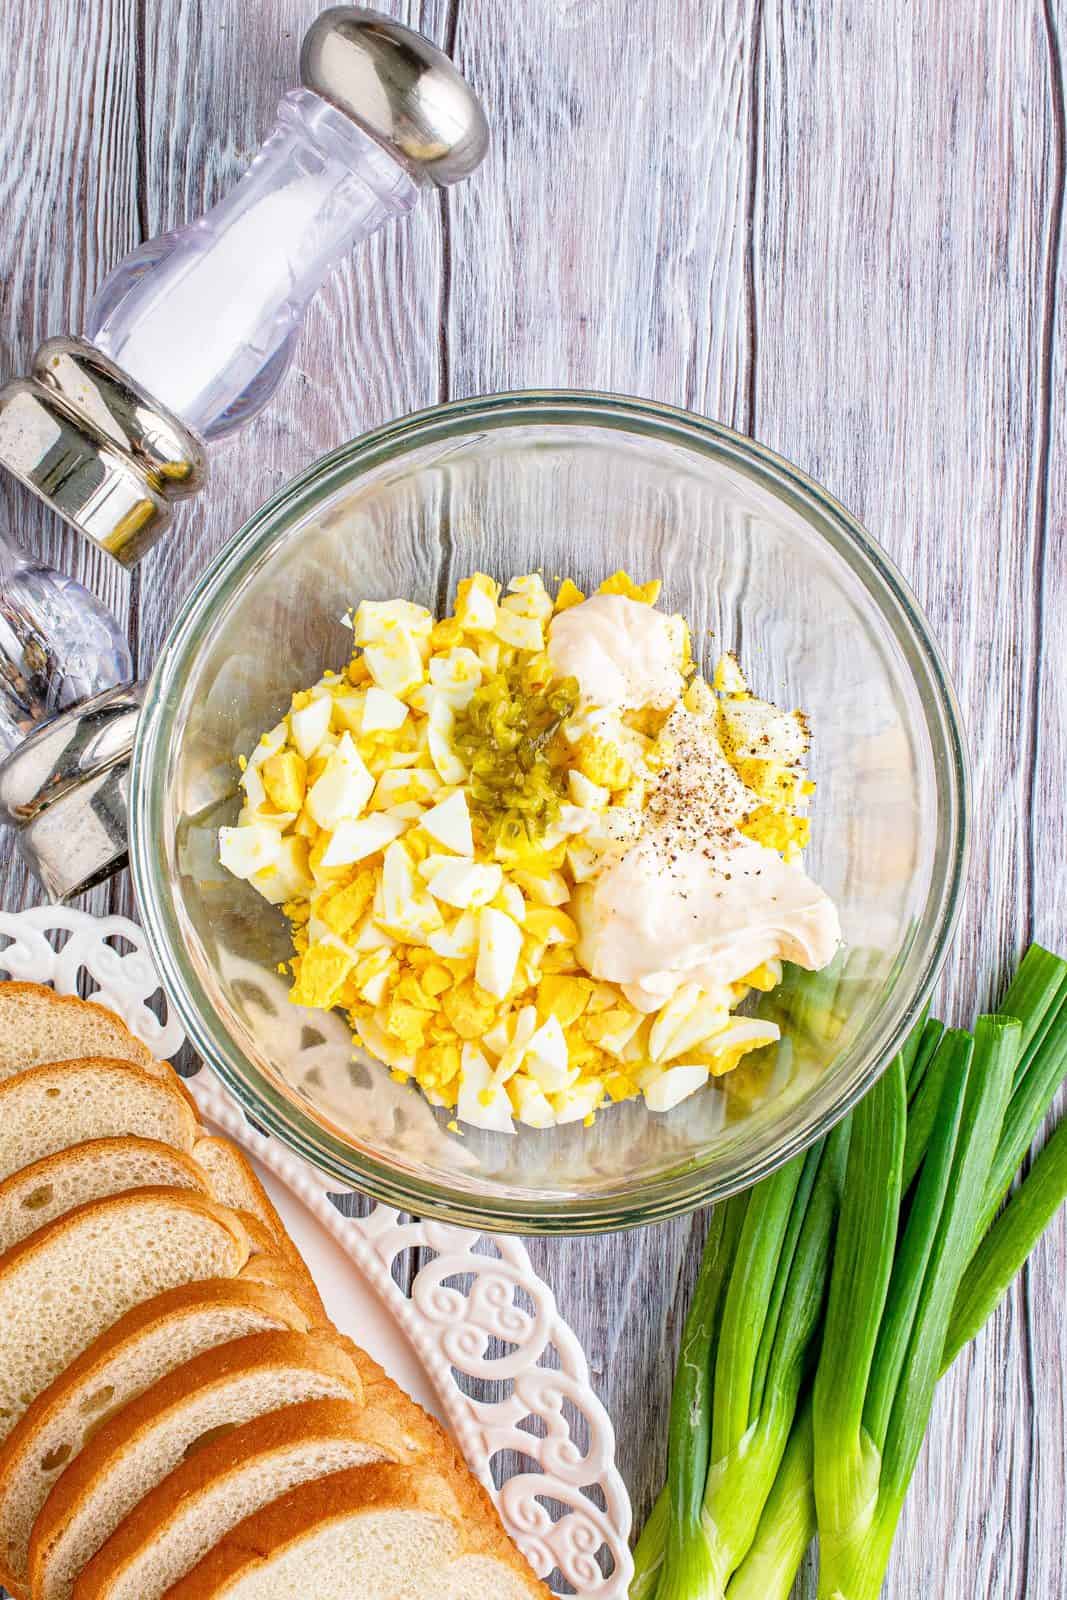 chopped hard cooked eggs, sweet relish, salt, pepper and mayonnaise added together in a bowl.